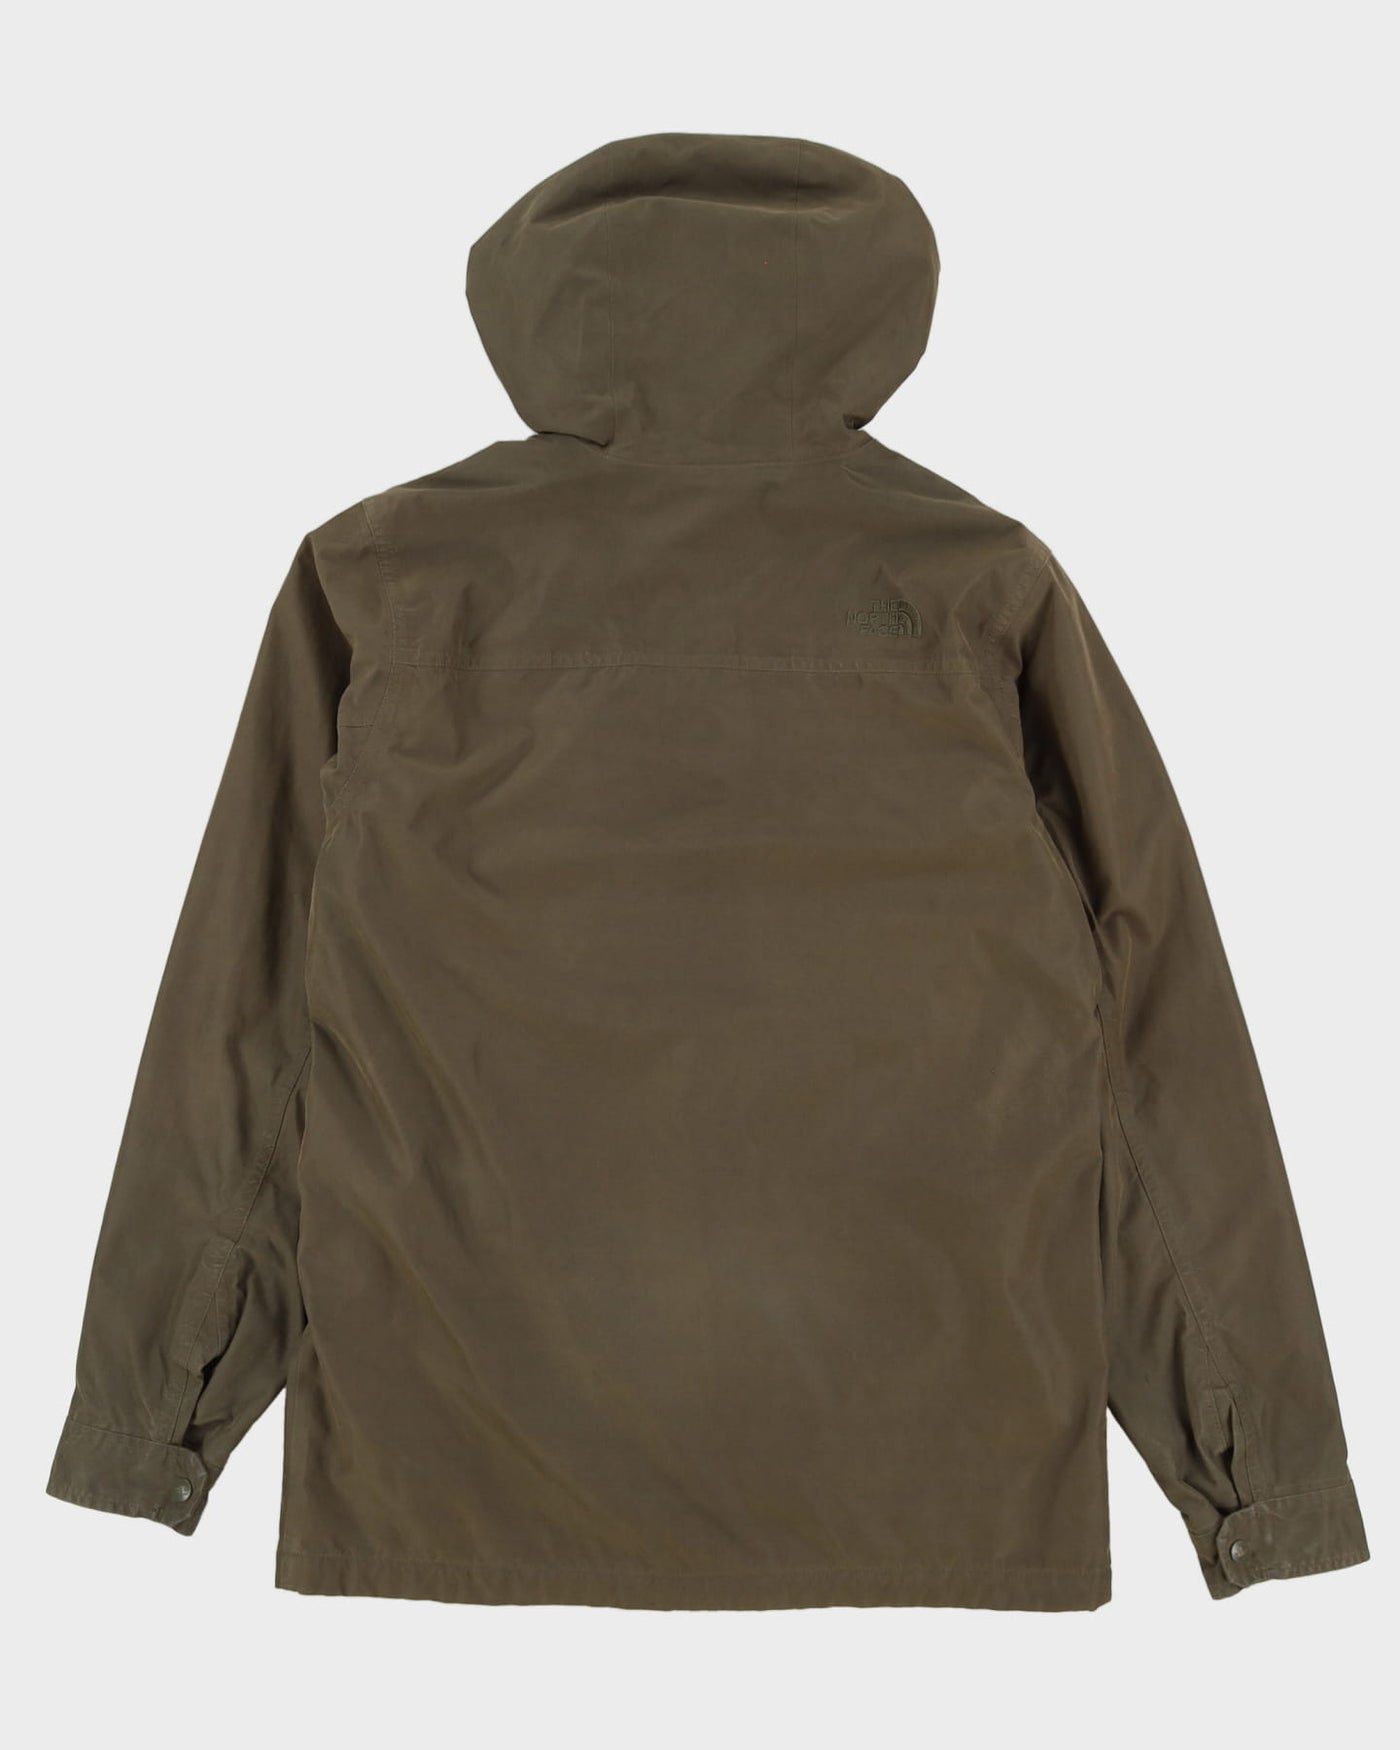 The North Face Green Fleece-Lined Hooded Rain Jacket - M